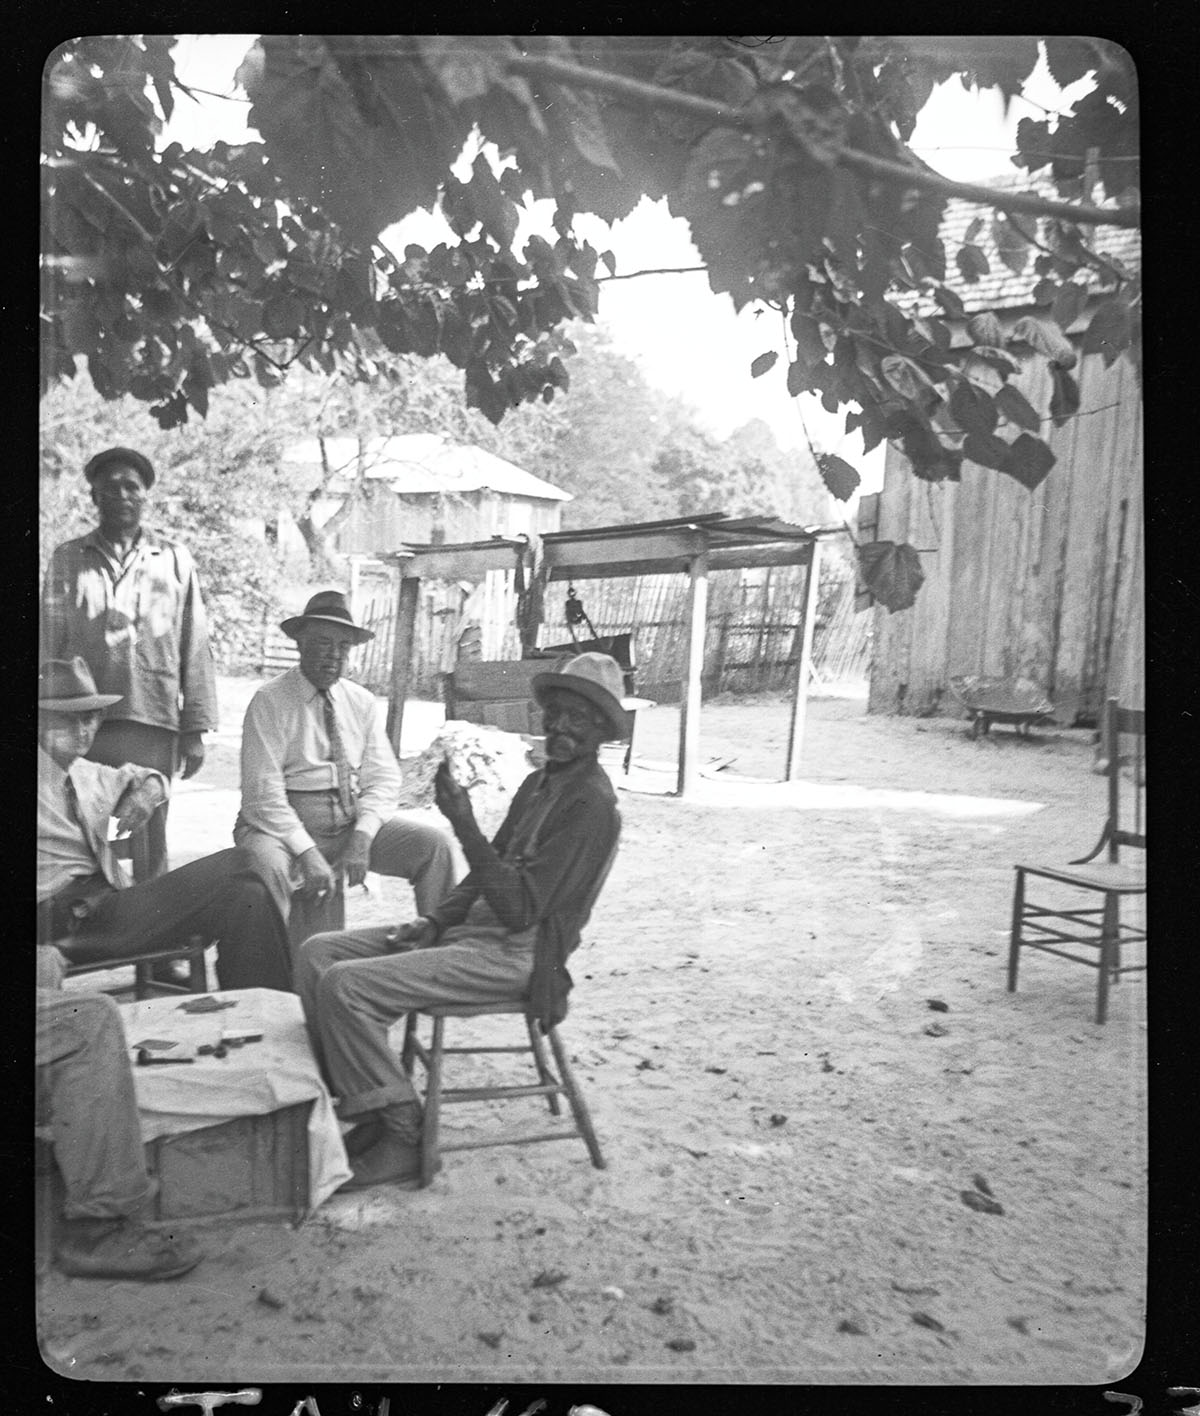 In this black and white photo, a group of men sit in wooden chairs on dirt ground